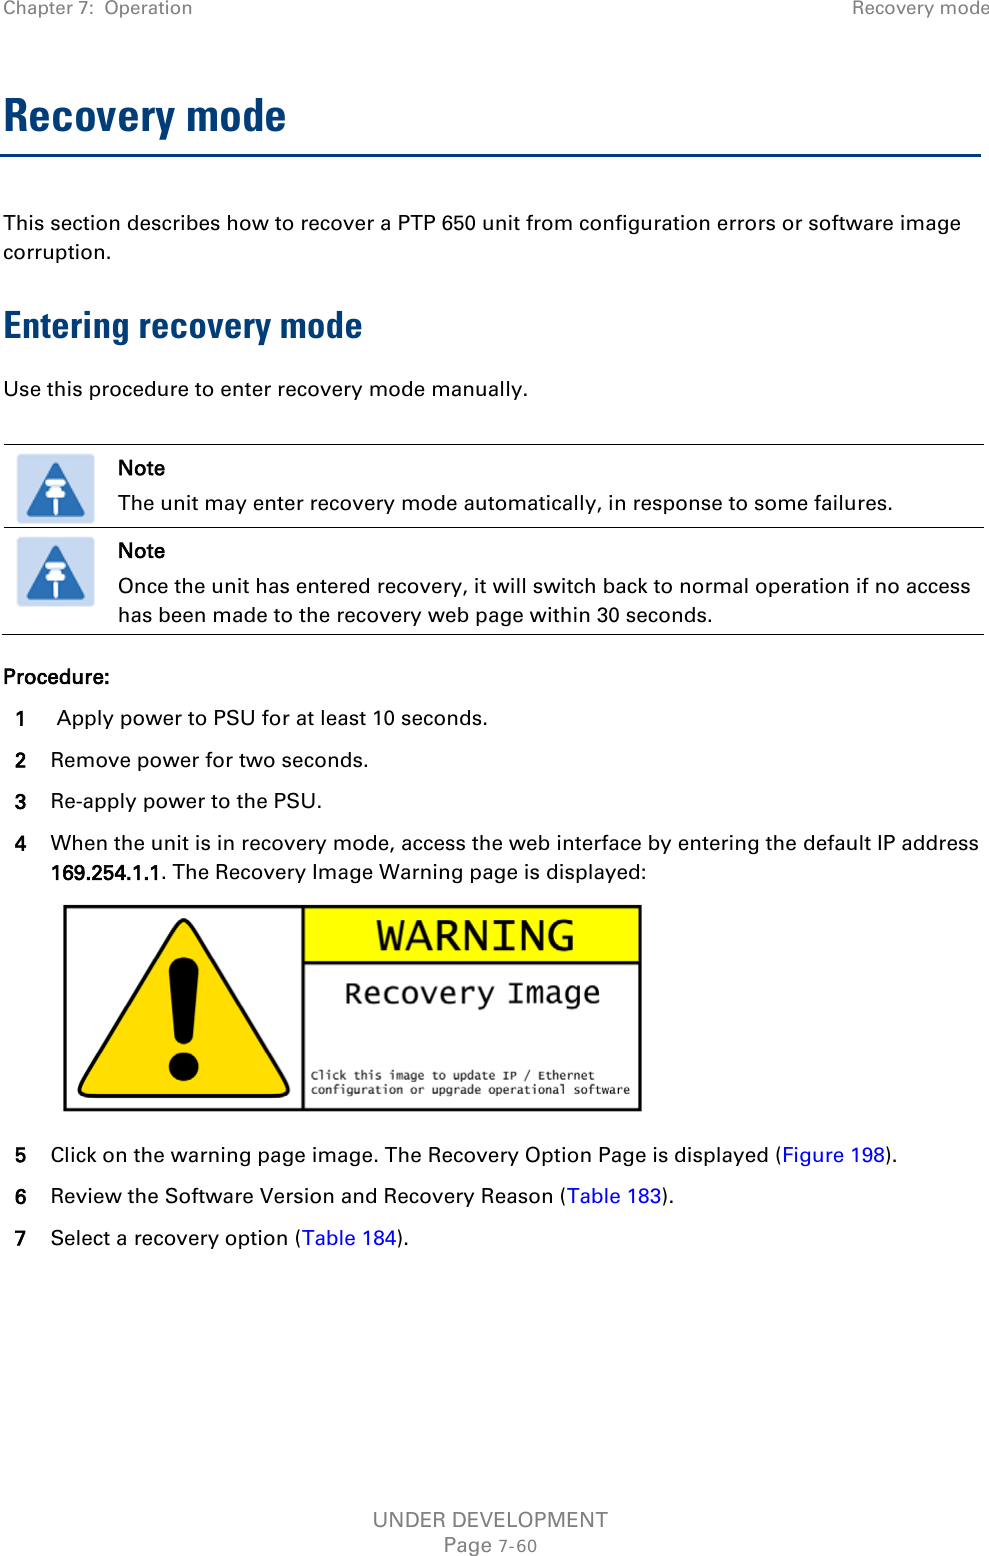 Chapter 7:  Operation Recovery mode  Recovery mode This section describes how to recover a PTP 650 unit from configuration errors or software image corruption. Entering recovery mode Use this procedure to enter recovery mode manually.   Note The unit may enter recovery mode automatically, in response to some failures.  Note Once the unit has entered recovery, it will switch back to normal operation if no access has been made to the recovery web page within 30 seconds. Procedure: 1  Apply power to PSU for at least 10 seconds. 2 Remove power for two seconds. 3 Re-apply power to the PSU. 4 When the unit is in recovery mode, access the web interface by entering the default IP address 169.254.1.1. The Recovery Image Warning page is displayed:  5 Click on the warning page image. The Recovery Option Page is displayed (Figure 198). 6 Review the Software Version and Recovery Reason (Table 183). 7 Select a recovery option (Table 184).     UNDER DEVELOPMENT Page 7-60 